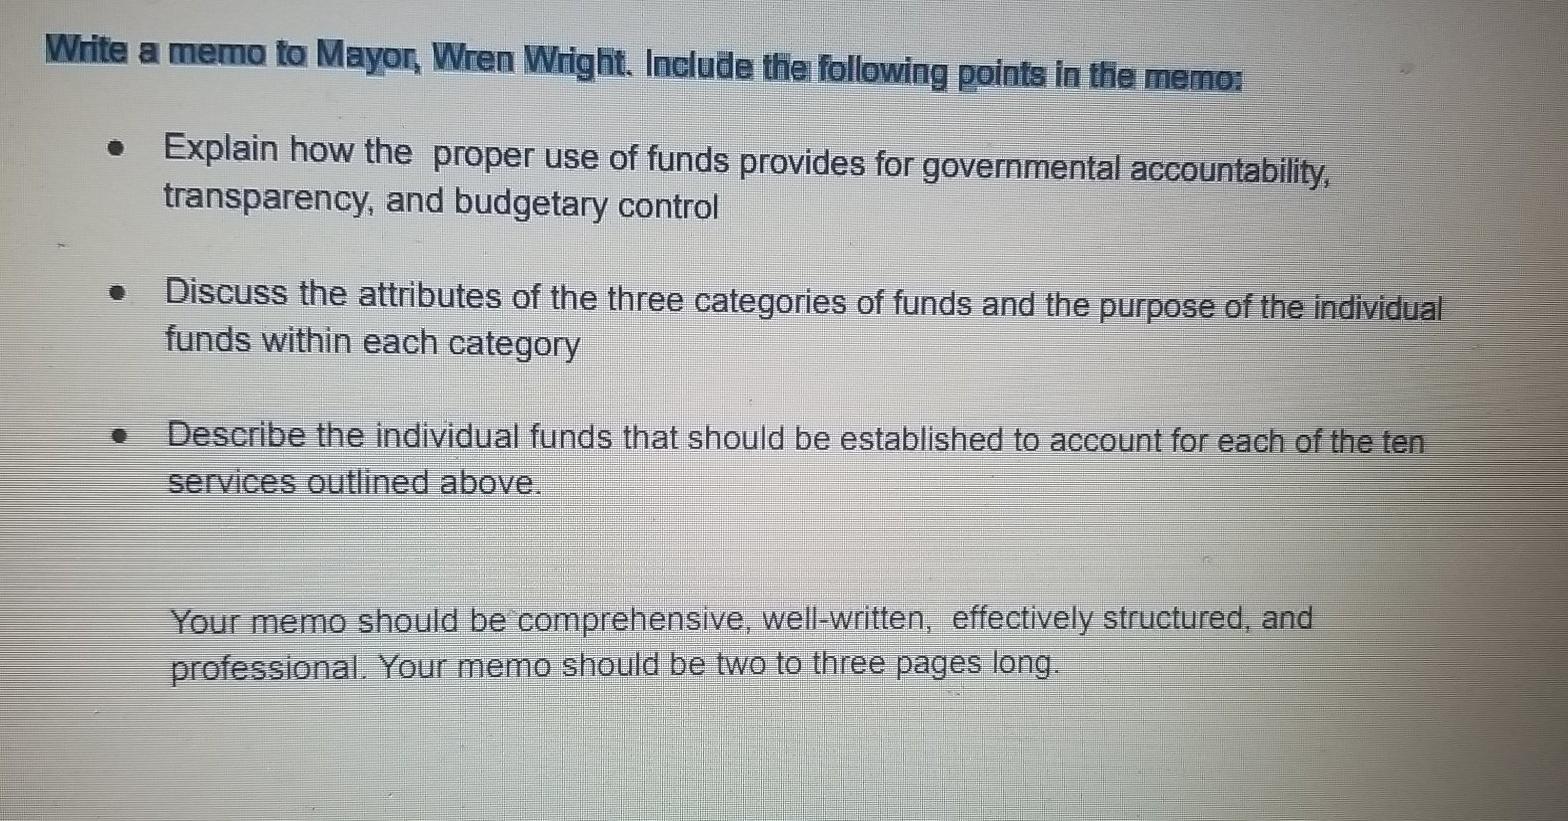 Write a memo ta Mayor, Wren Wright. Include the following points in thie memo: Explain how the proper use of funds provides f